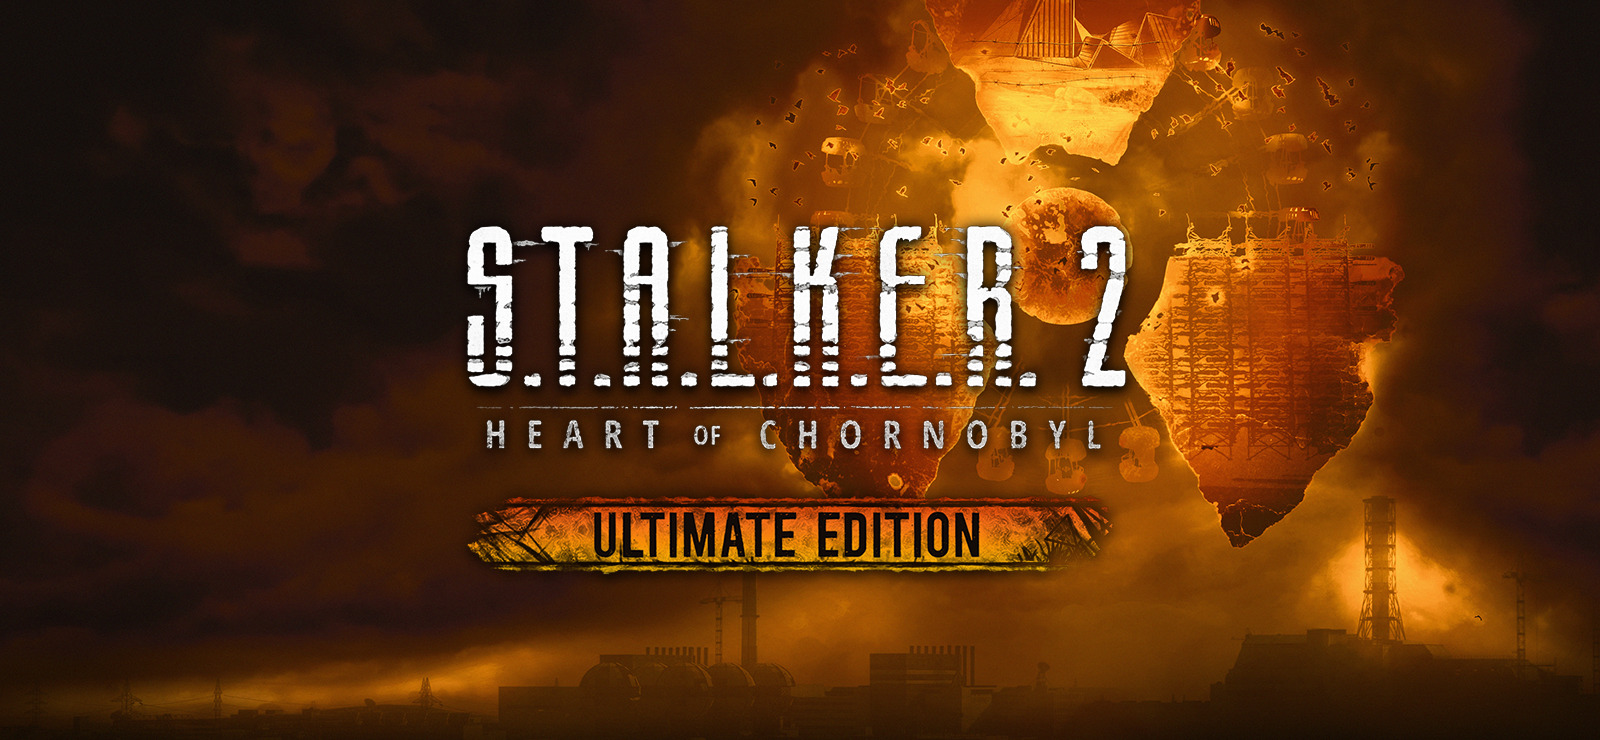 S.T.A.L.K.E.R. 2: Heart of Chernobyl New Visual Released : r